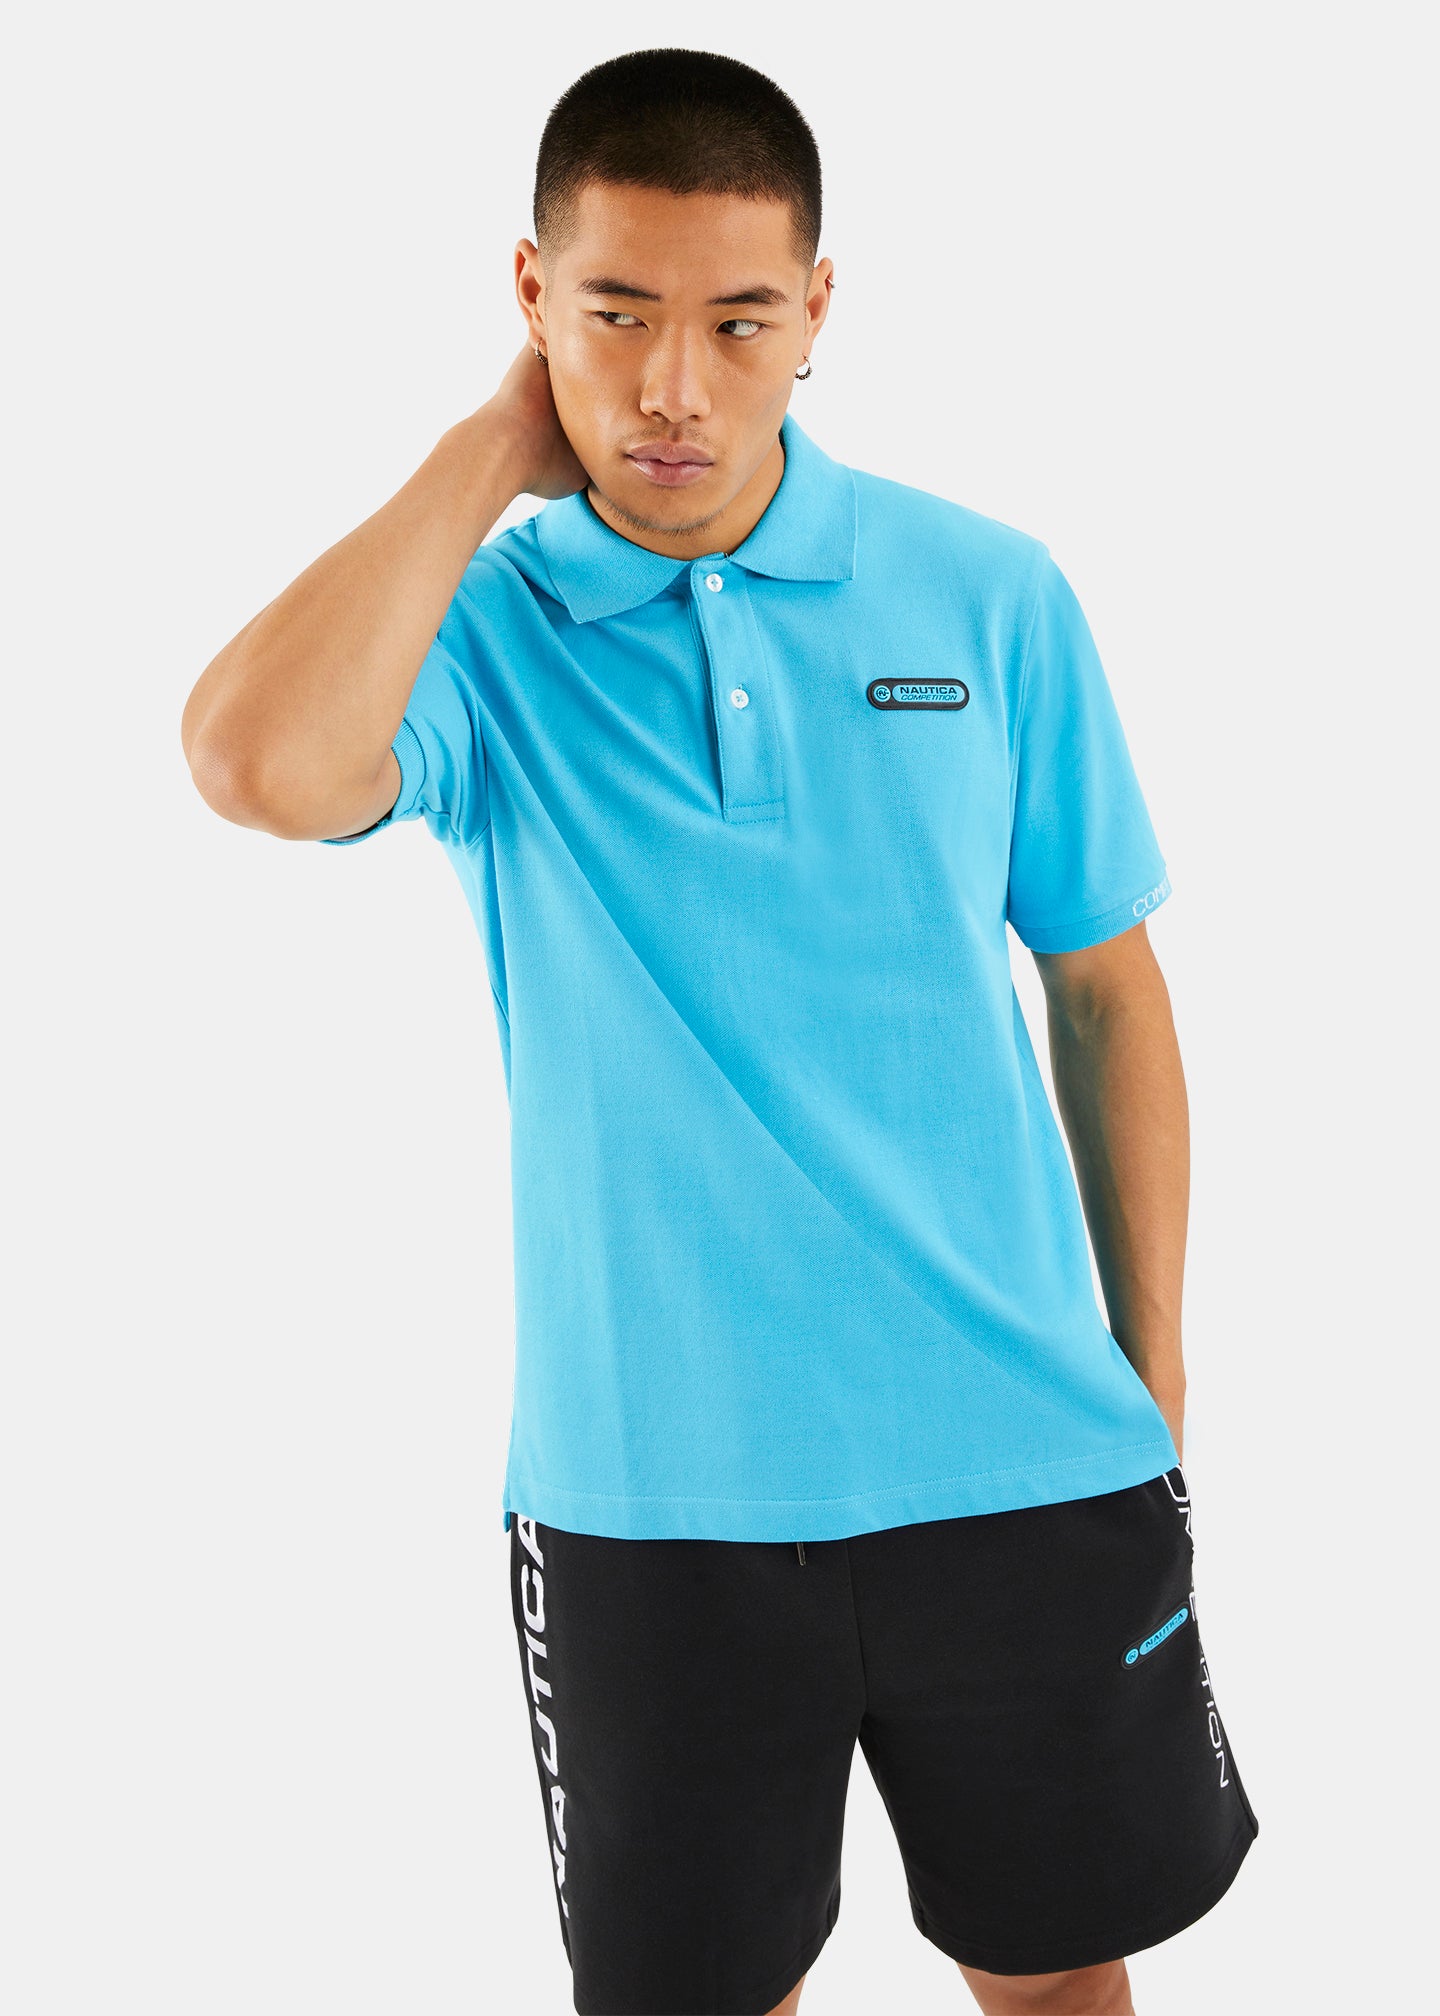 Nautica Competition Paxton Polo Shirt - Electric Blue - Front